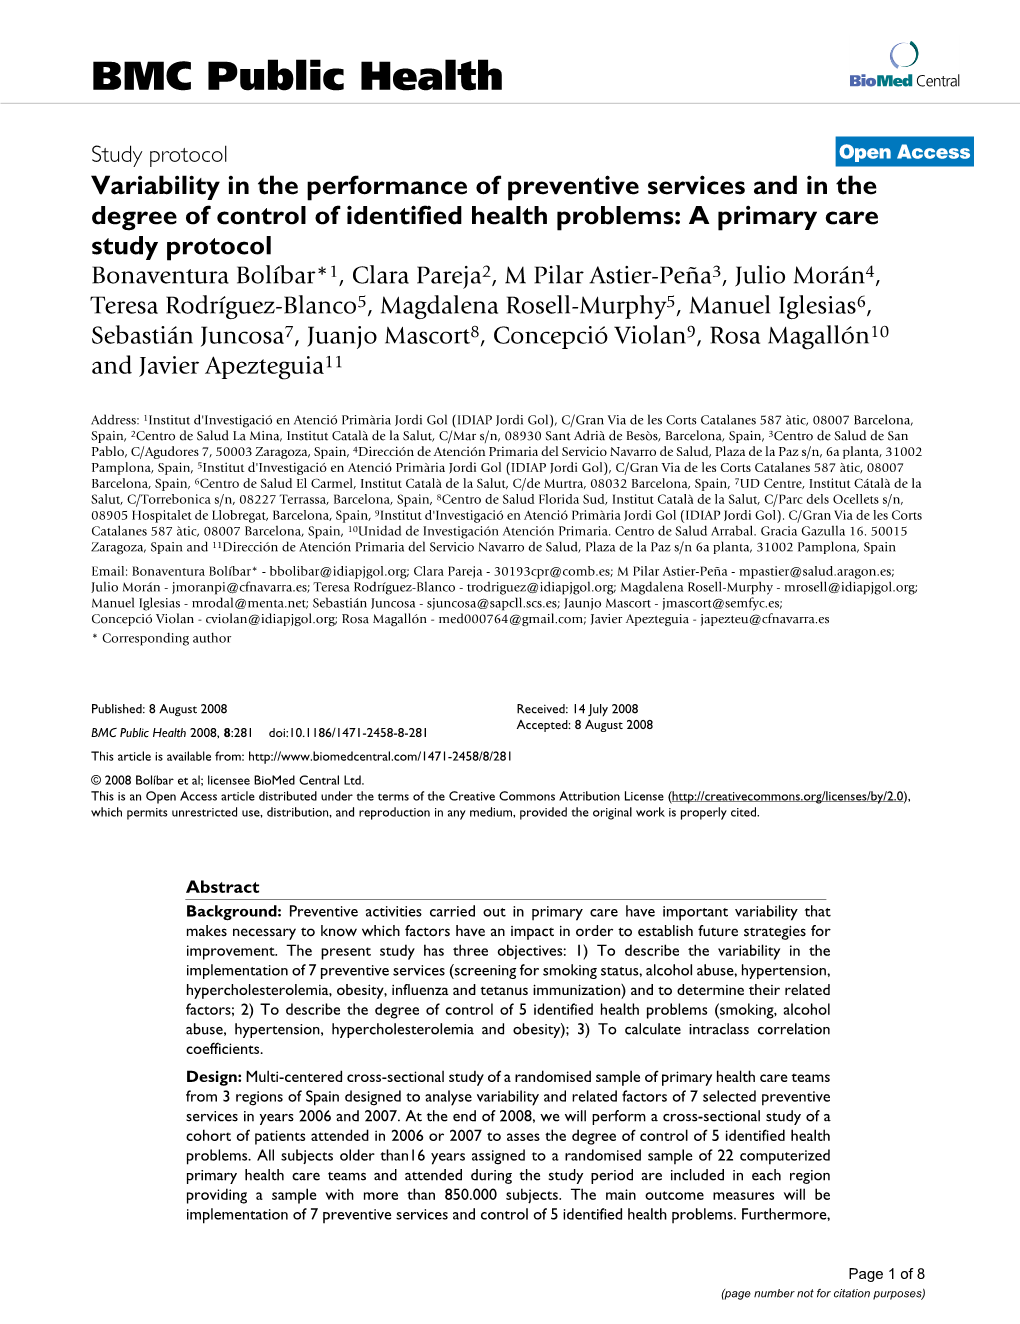 Variability in the Performance of Preventive Services and in The